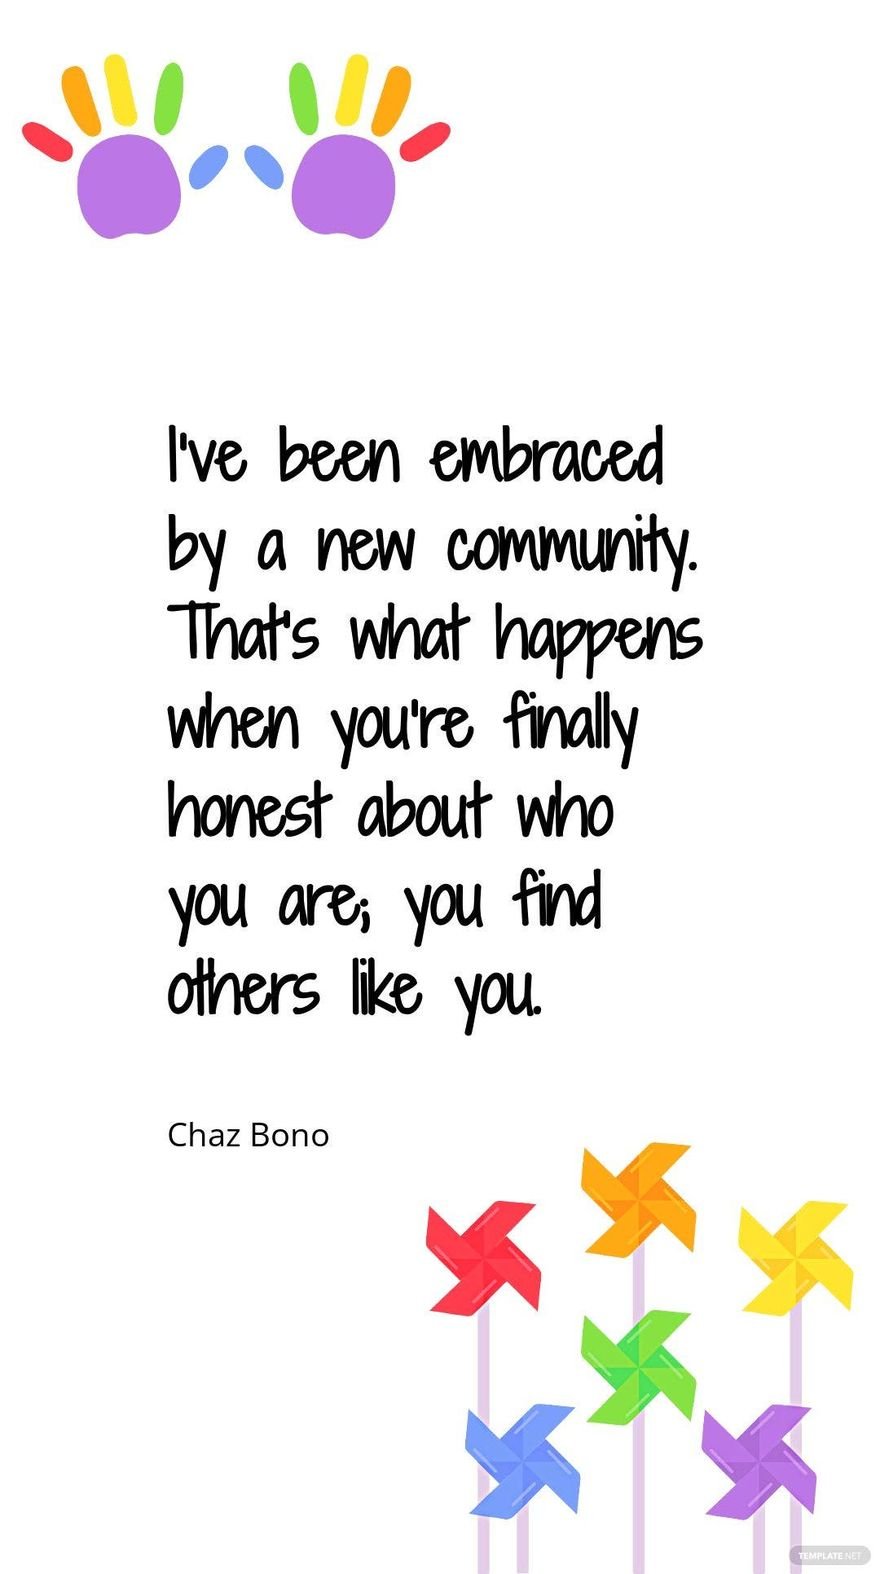 Chaz Bono - I’ve been embraced by a new community. That’s what happens when you’re finally honest about who you are; you find others like you.